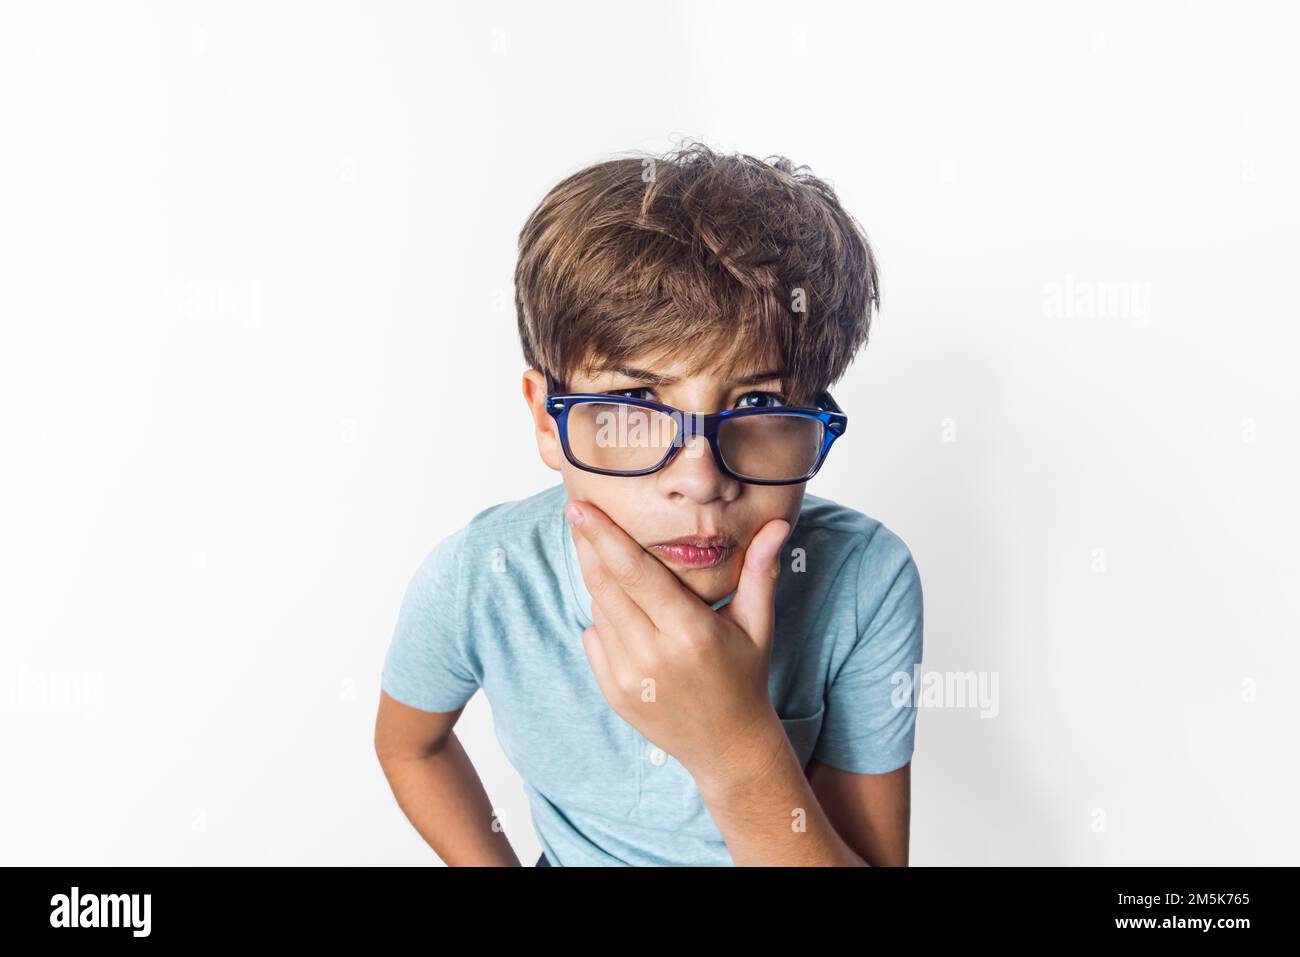 An exaggerated close up portrait of a funny little boy with glasses making a thinking face Stock Photo